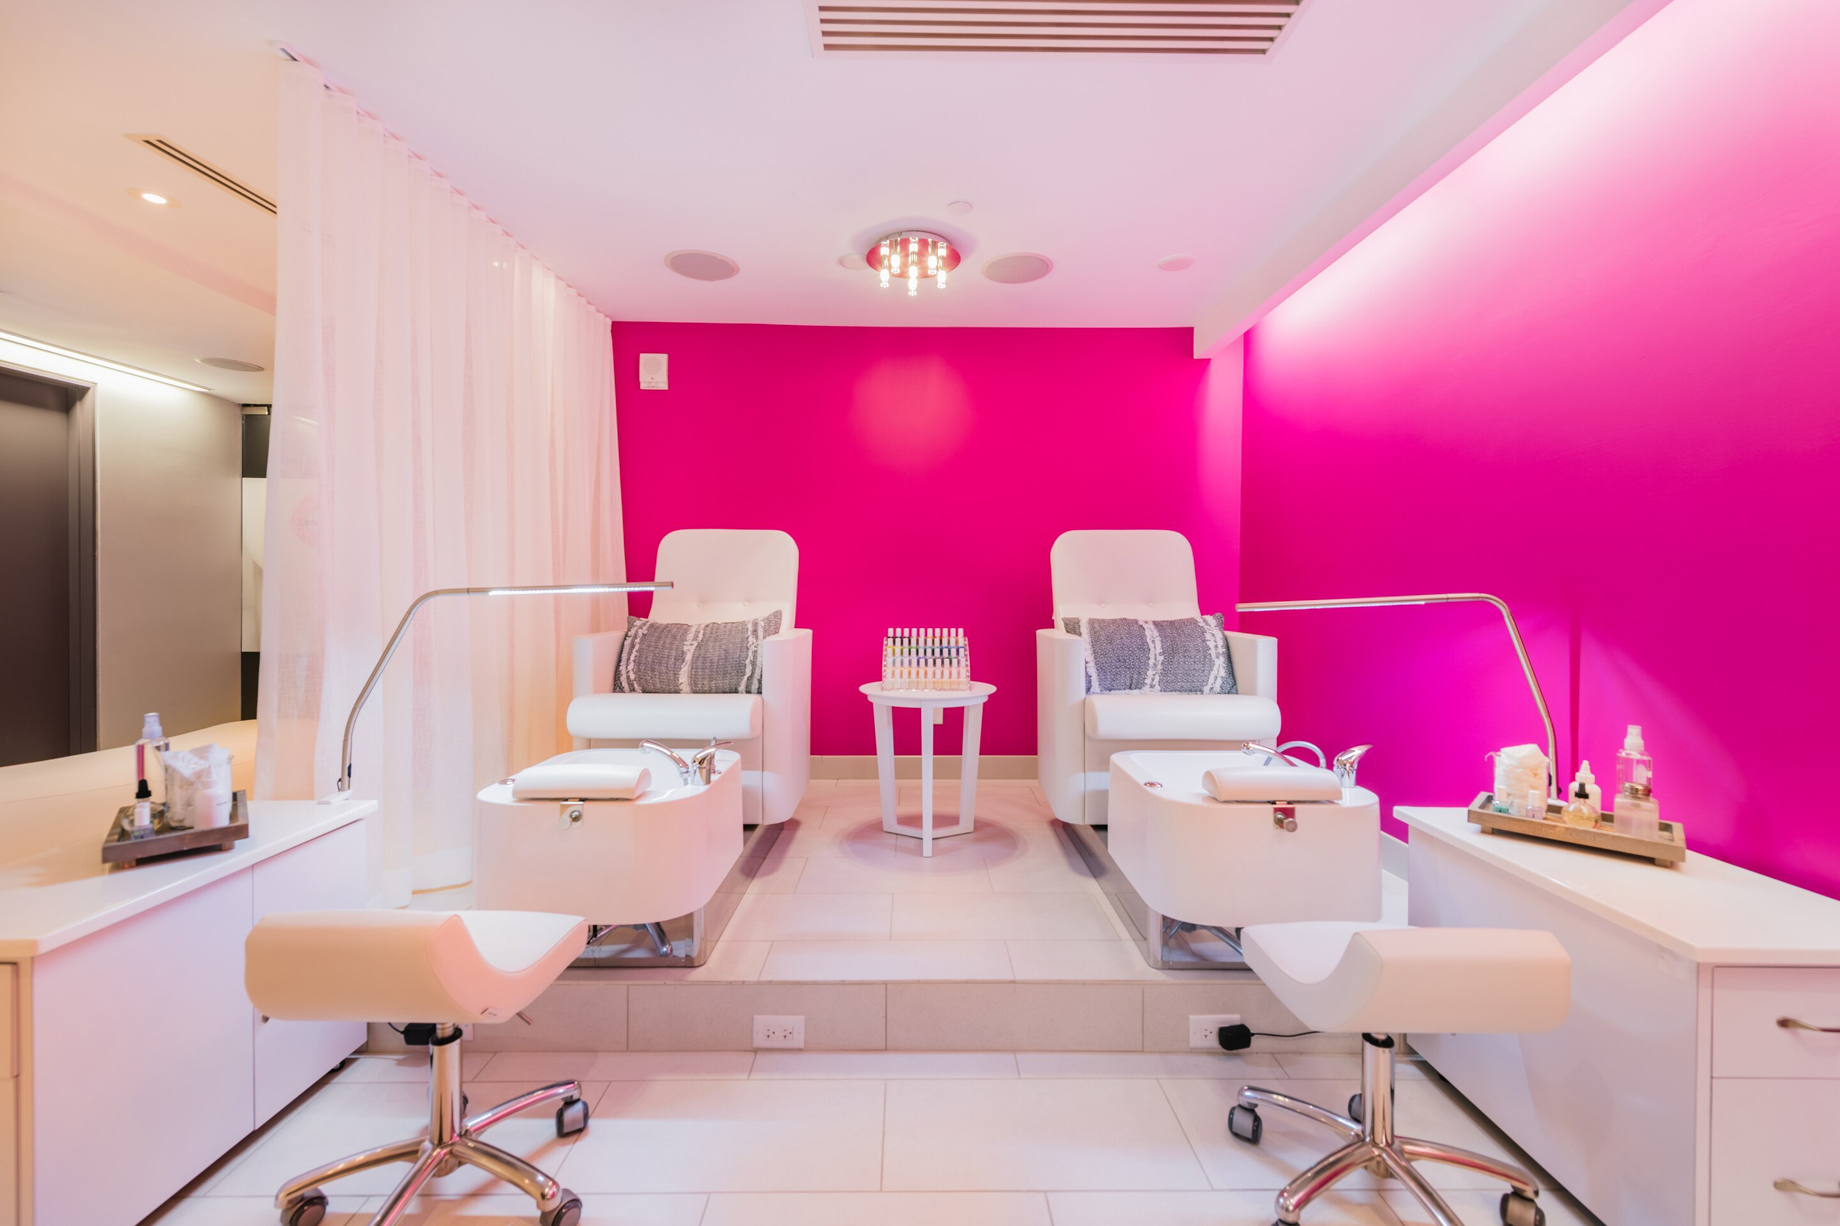 Lee Nail and Spa - Fort Lauderdale - Book Online - Prices, Reviews, Photos